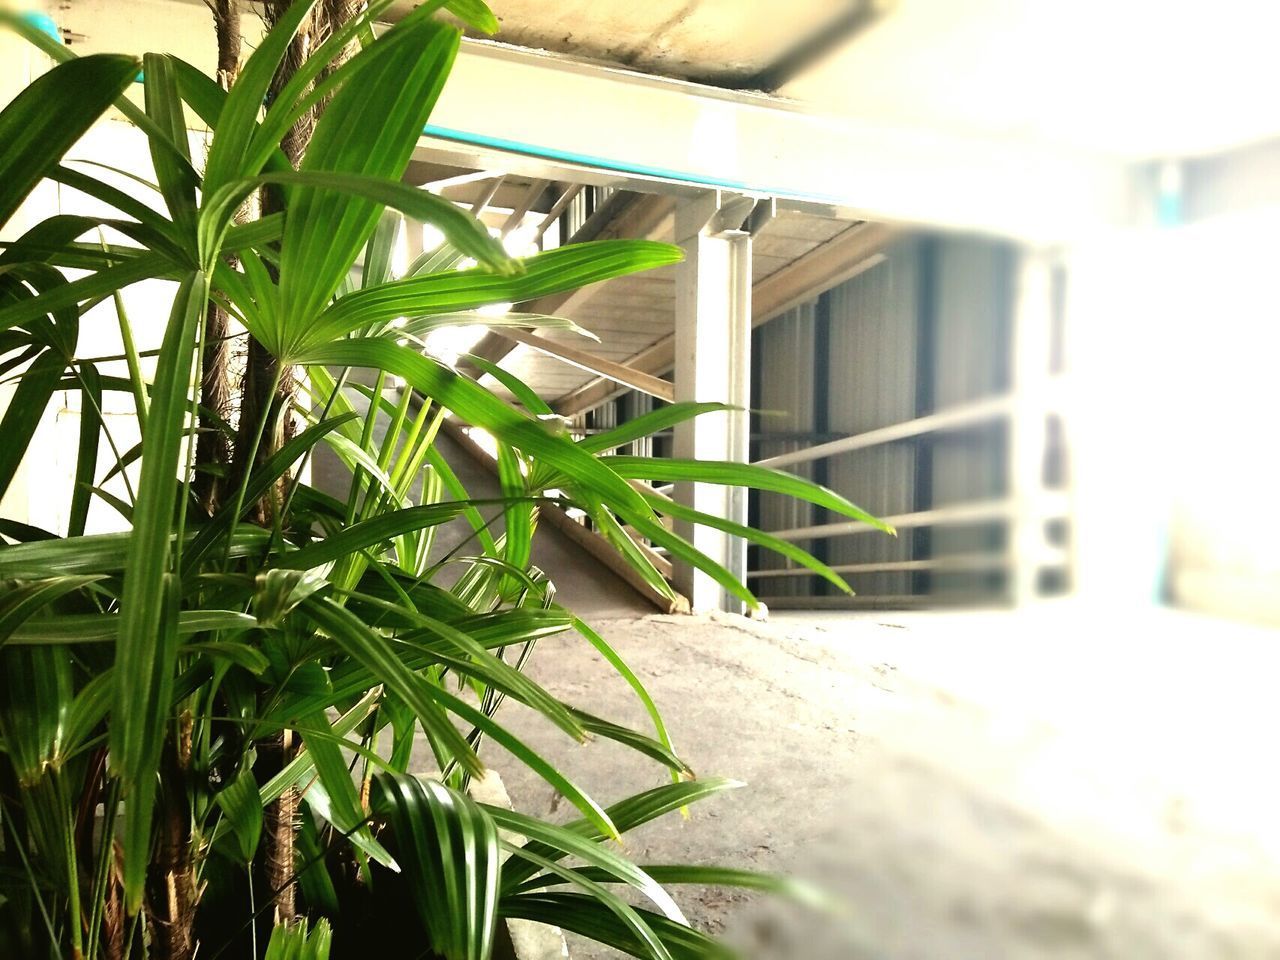 CLOSE-UP OF PLANT IN FRONT OF BUILDING